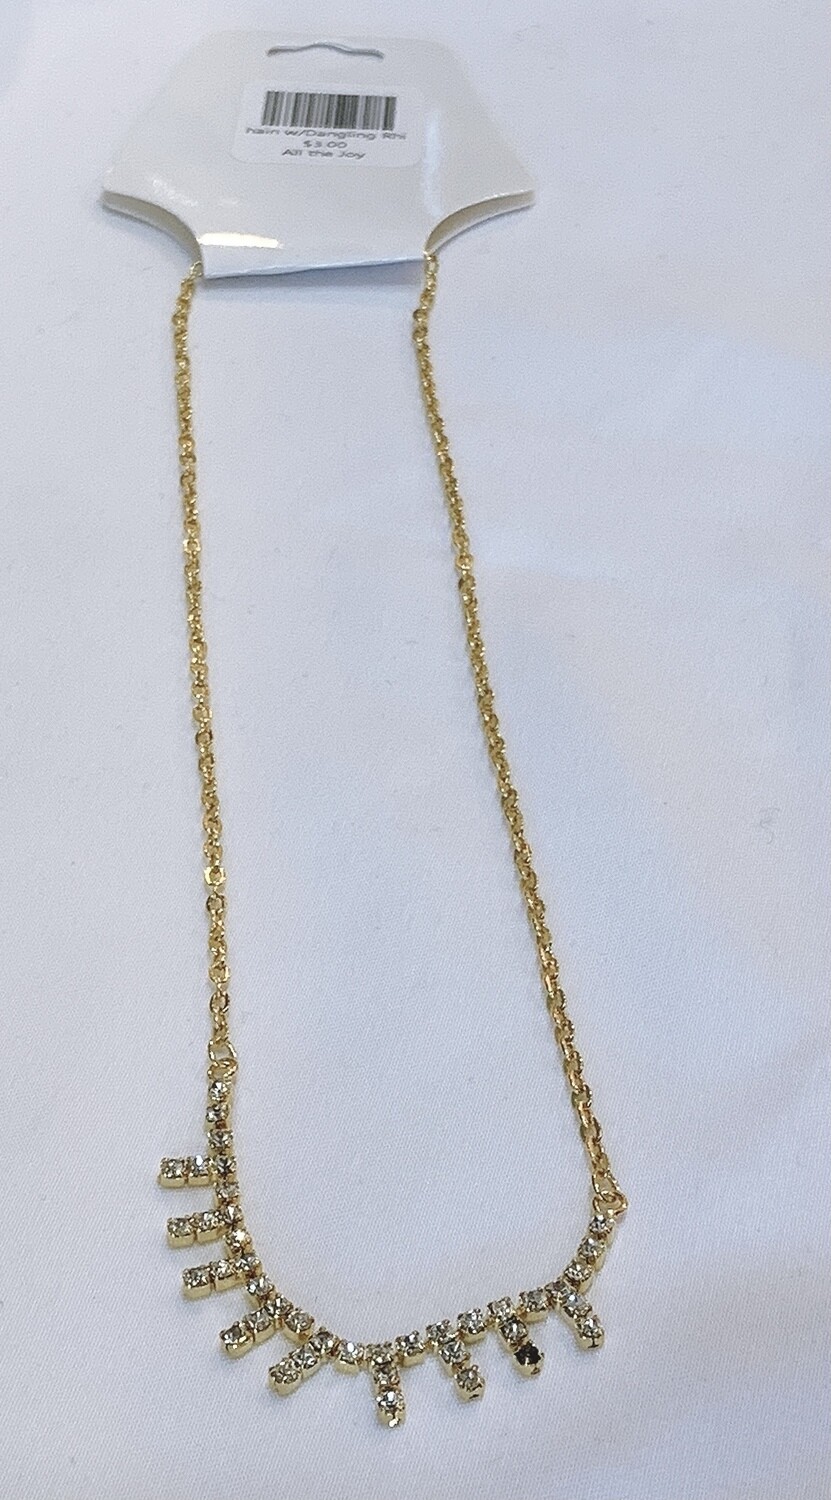 Gold Chain w/Dangling Rhinestones 16” Necklace 